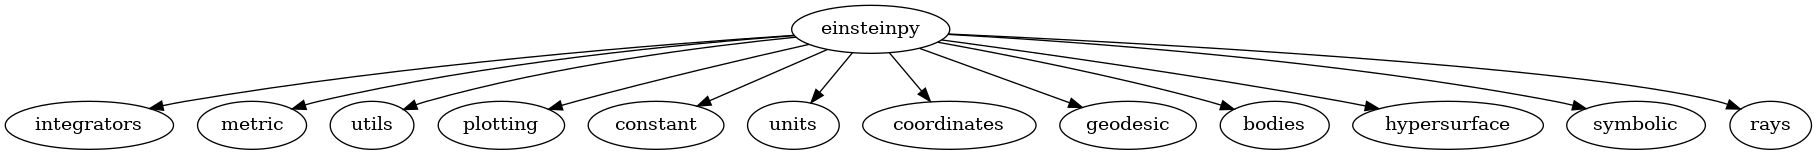 digraph {
    "einsteinpy" -> "integrators", "metric", "utils", "plotting", "constant", "units", "coordinates", "geodesic", "bodies", "hypersurface", "symbolic", "rays"

}